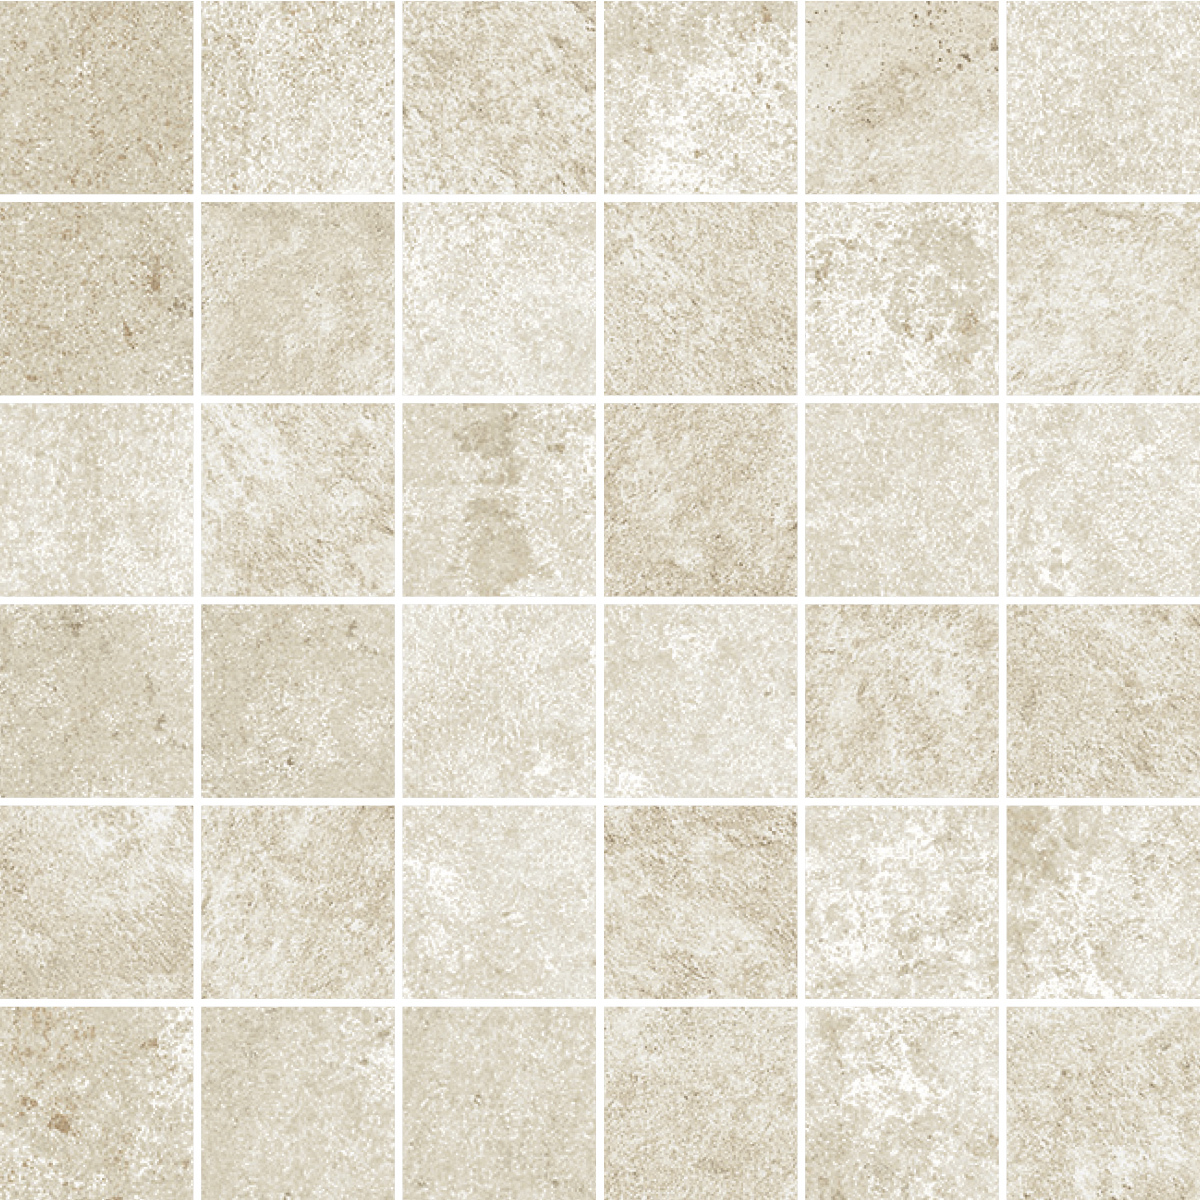 Novabell Overland Avorio Naturale Mosaic 5x5 OVD885K 30x30cm